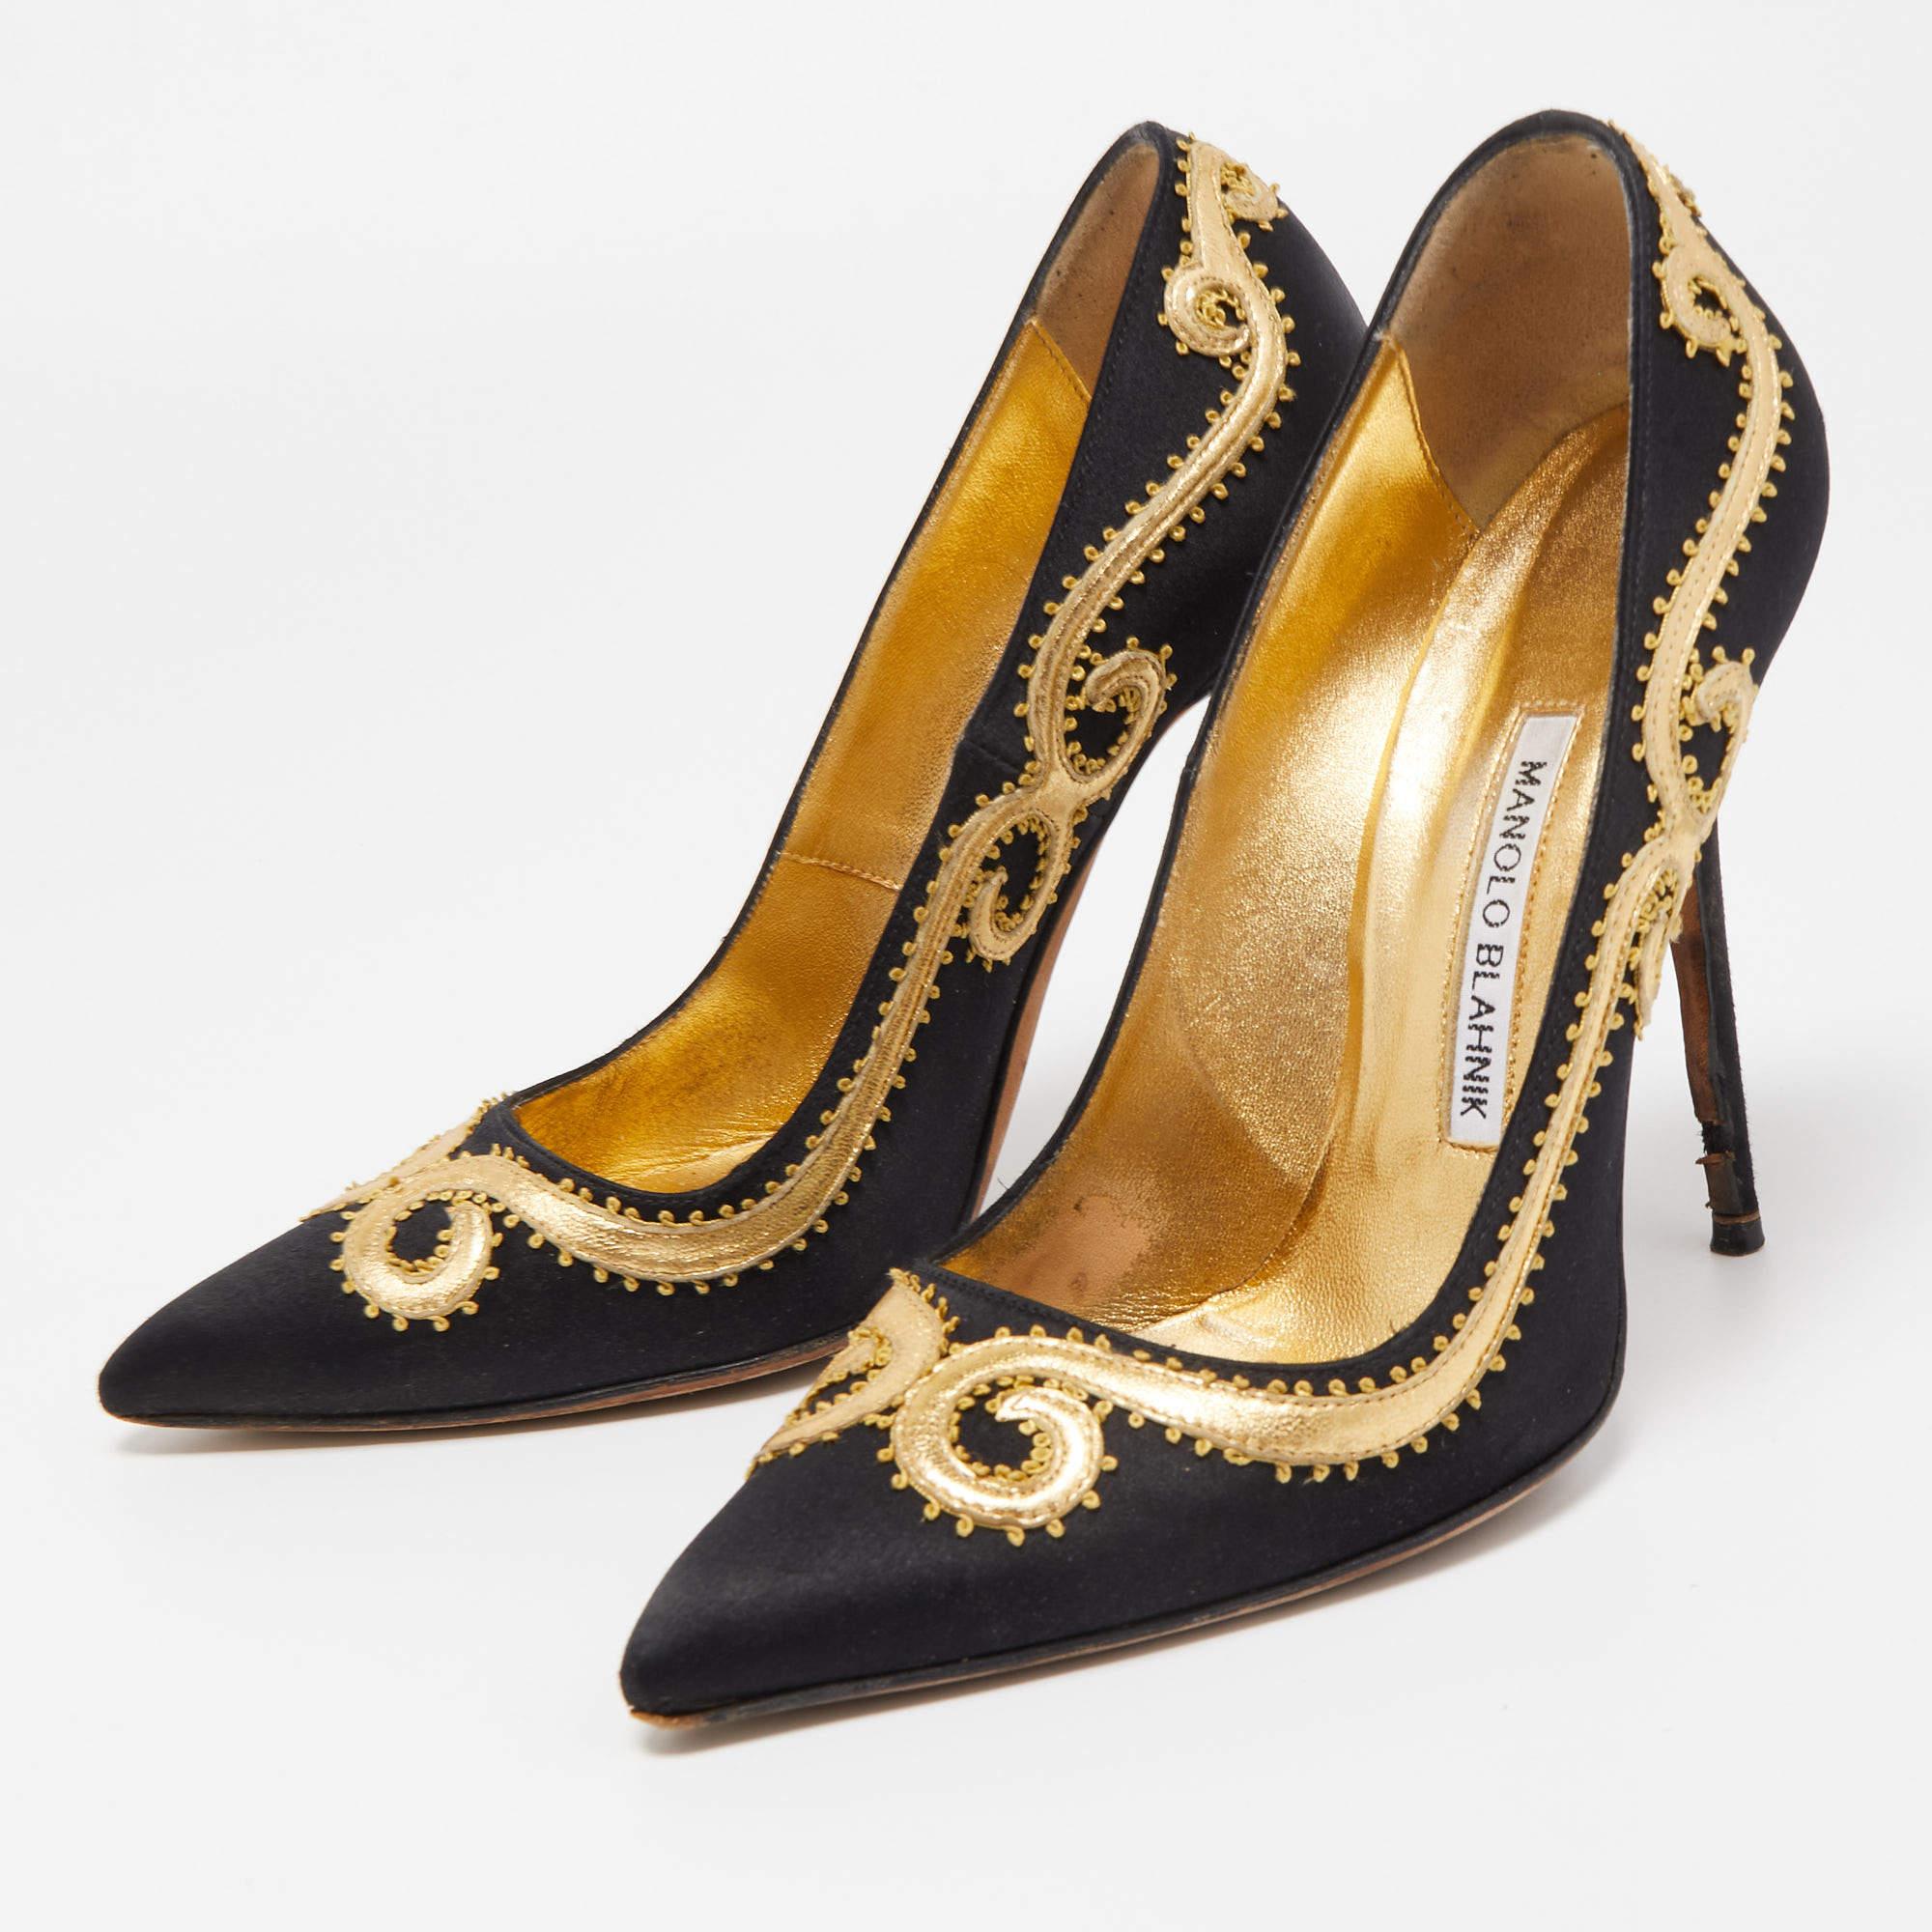 Women's Manolo Blahnik Black/Gold Satin and Leather Embroidered Pumps Size 37